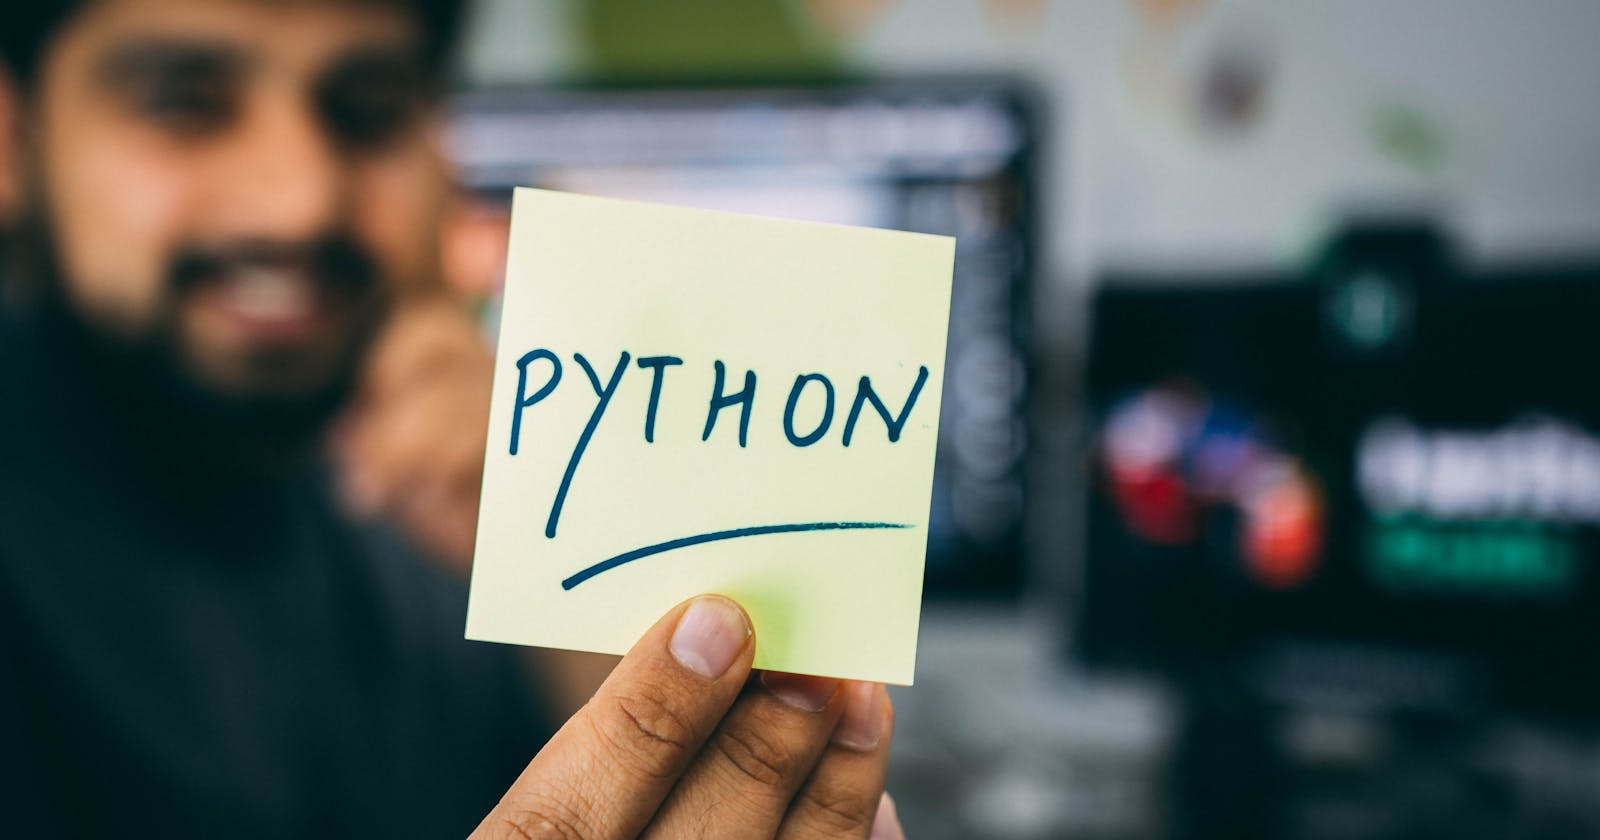 How can I learn Python in a week?